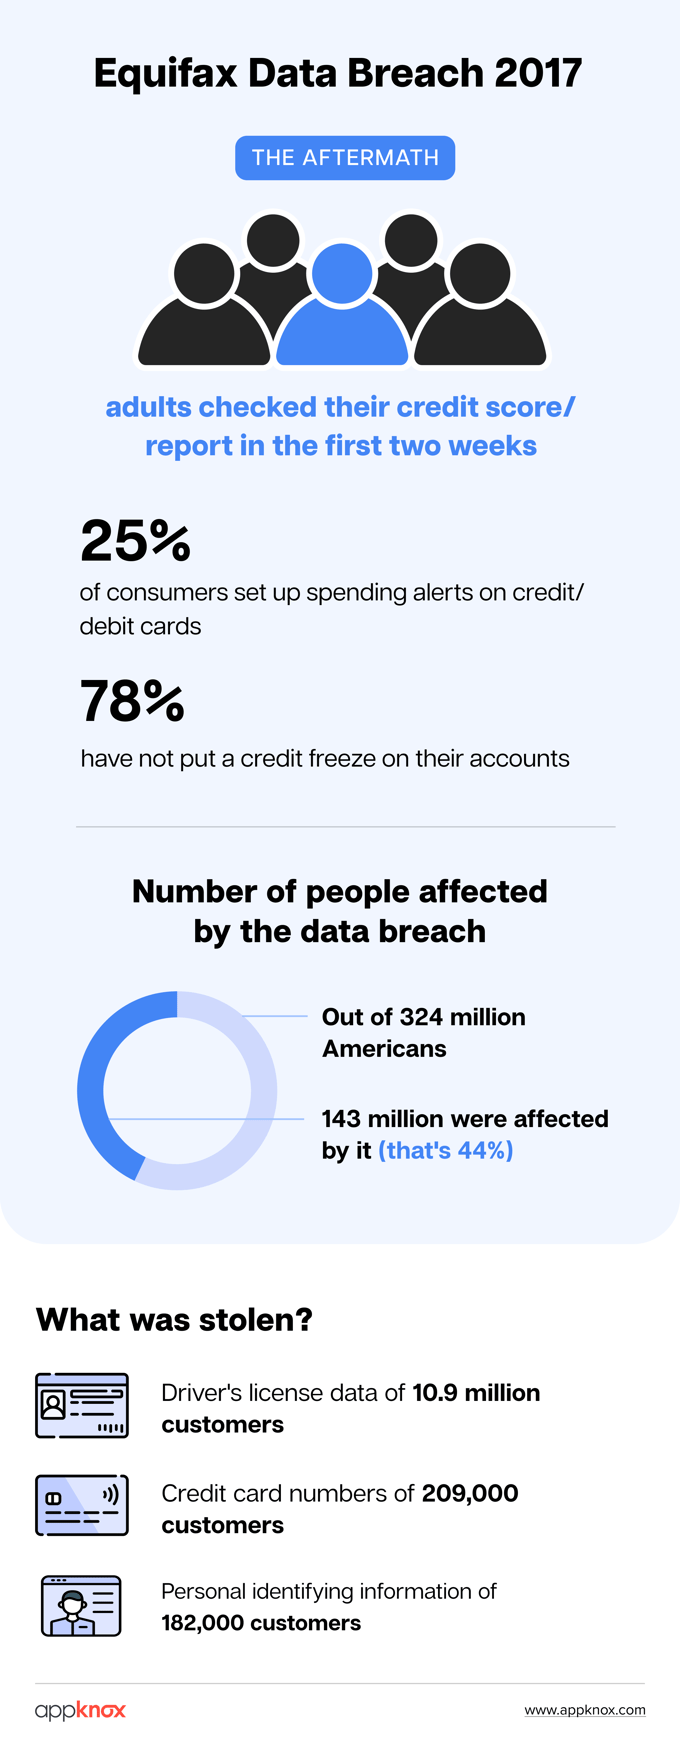 The aftermath of the Equifax Data Breach 2017 and how it impacted Americans